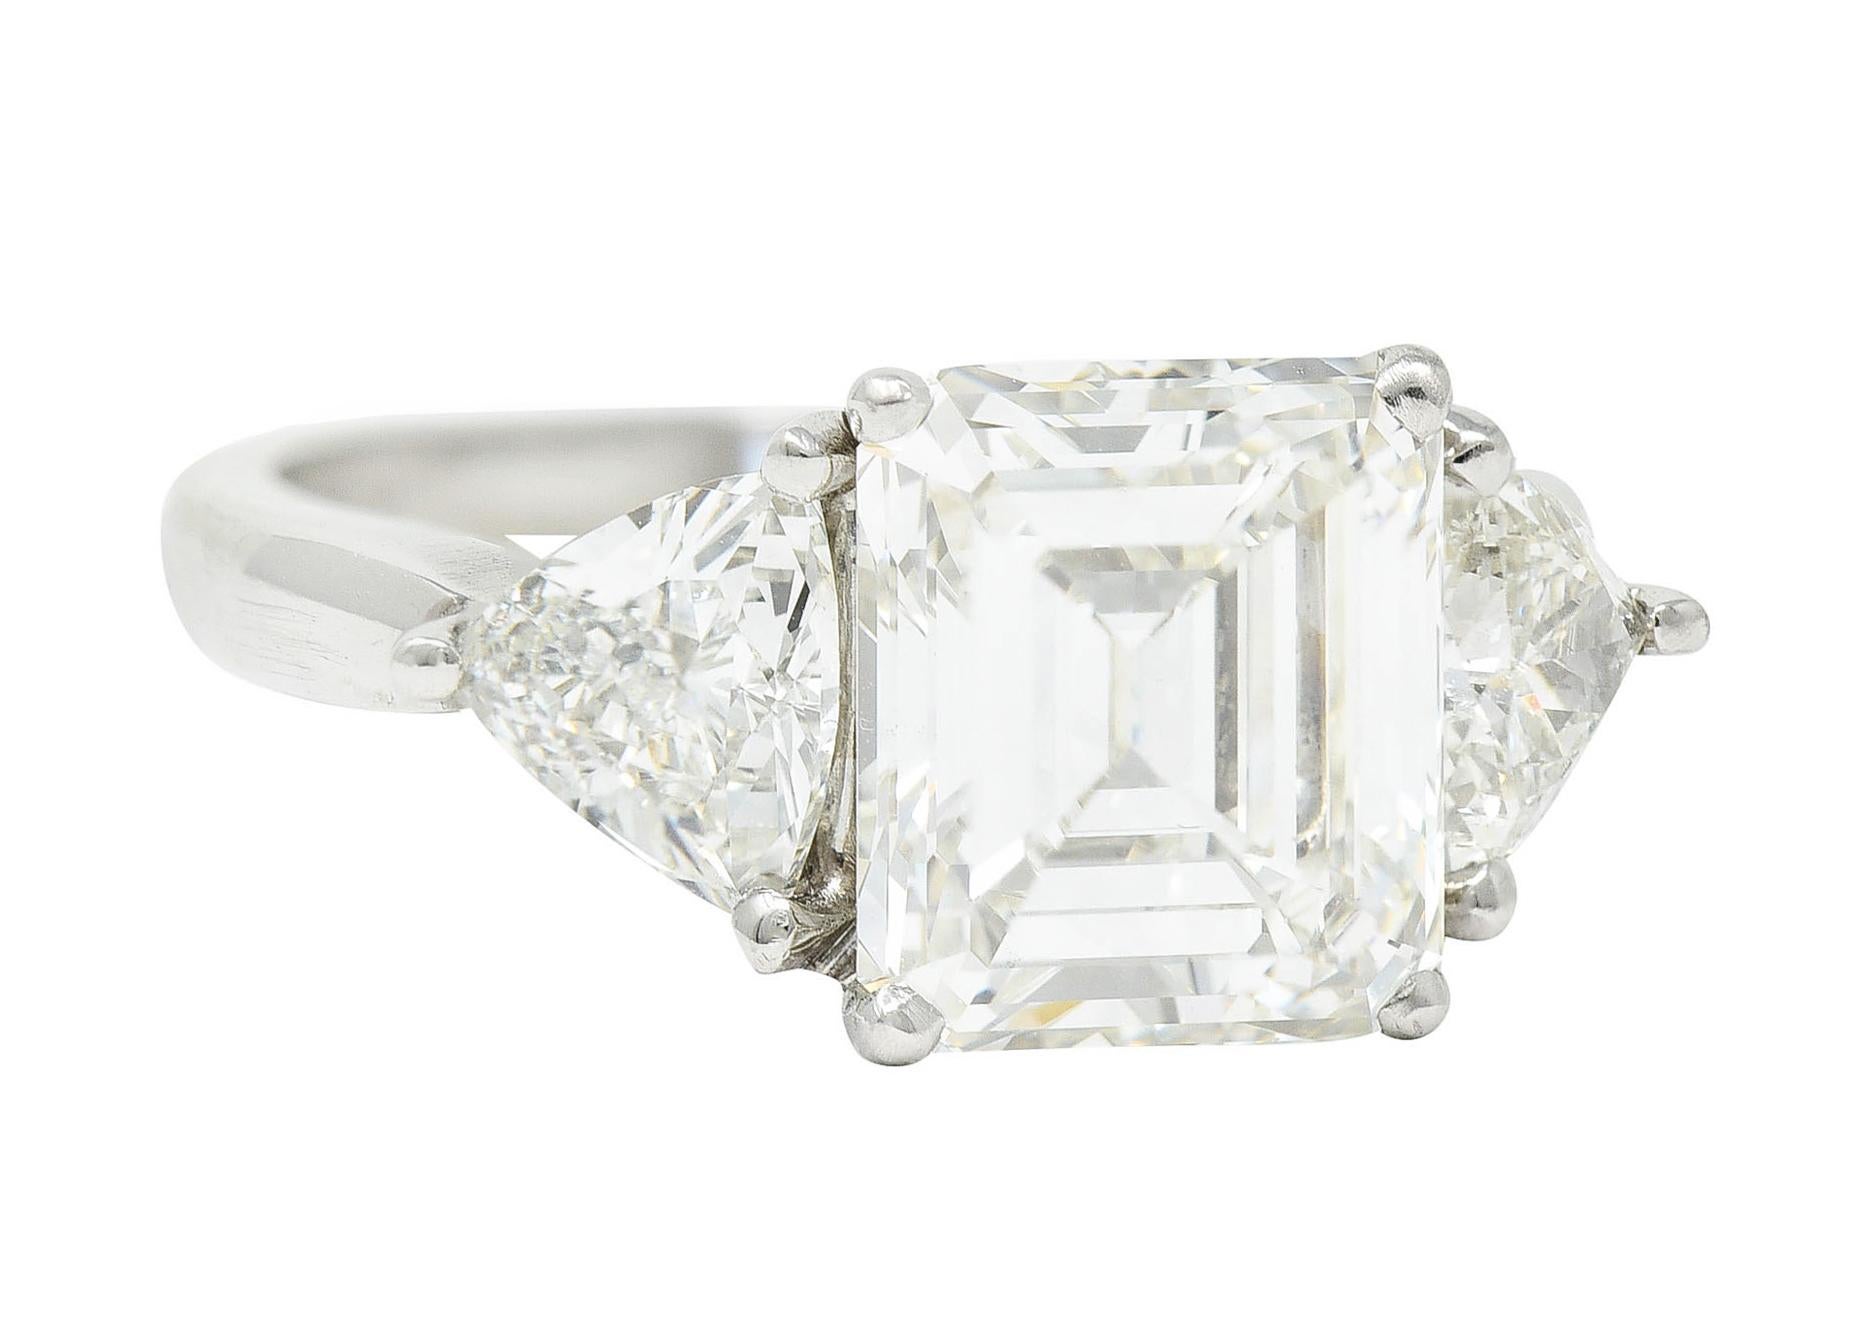 Centering an emerald cut diamond weighing 2.95 carats - J color with VVS2 clarity

Basket set and flanked by cathedral shoulders set with trilliant cut diamonds

Weighing in total approximately 0.75 carat with well matched J color and VS